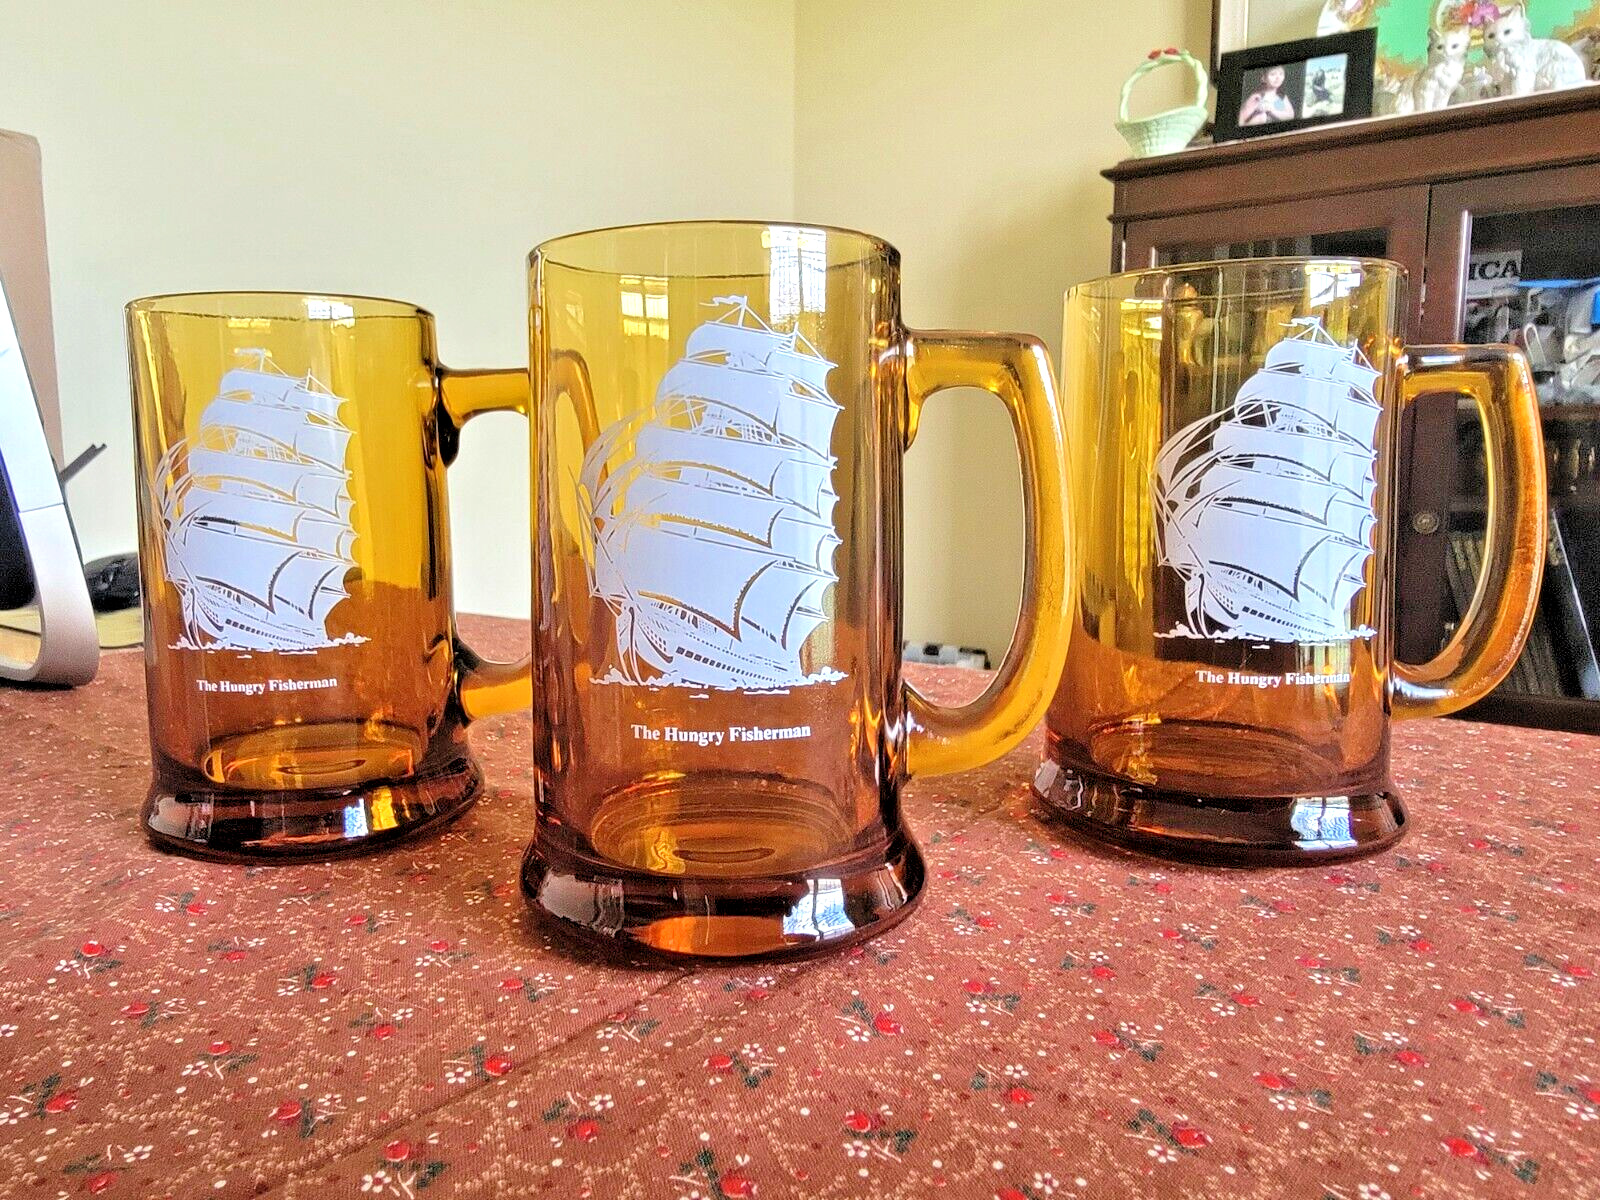 Set of 3 VTG Amber Glass Beer Mugs The Hungry Fisherman Resturant Knoxville, TN